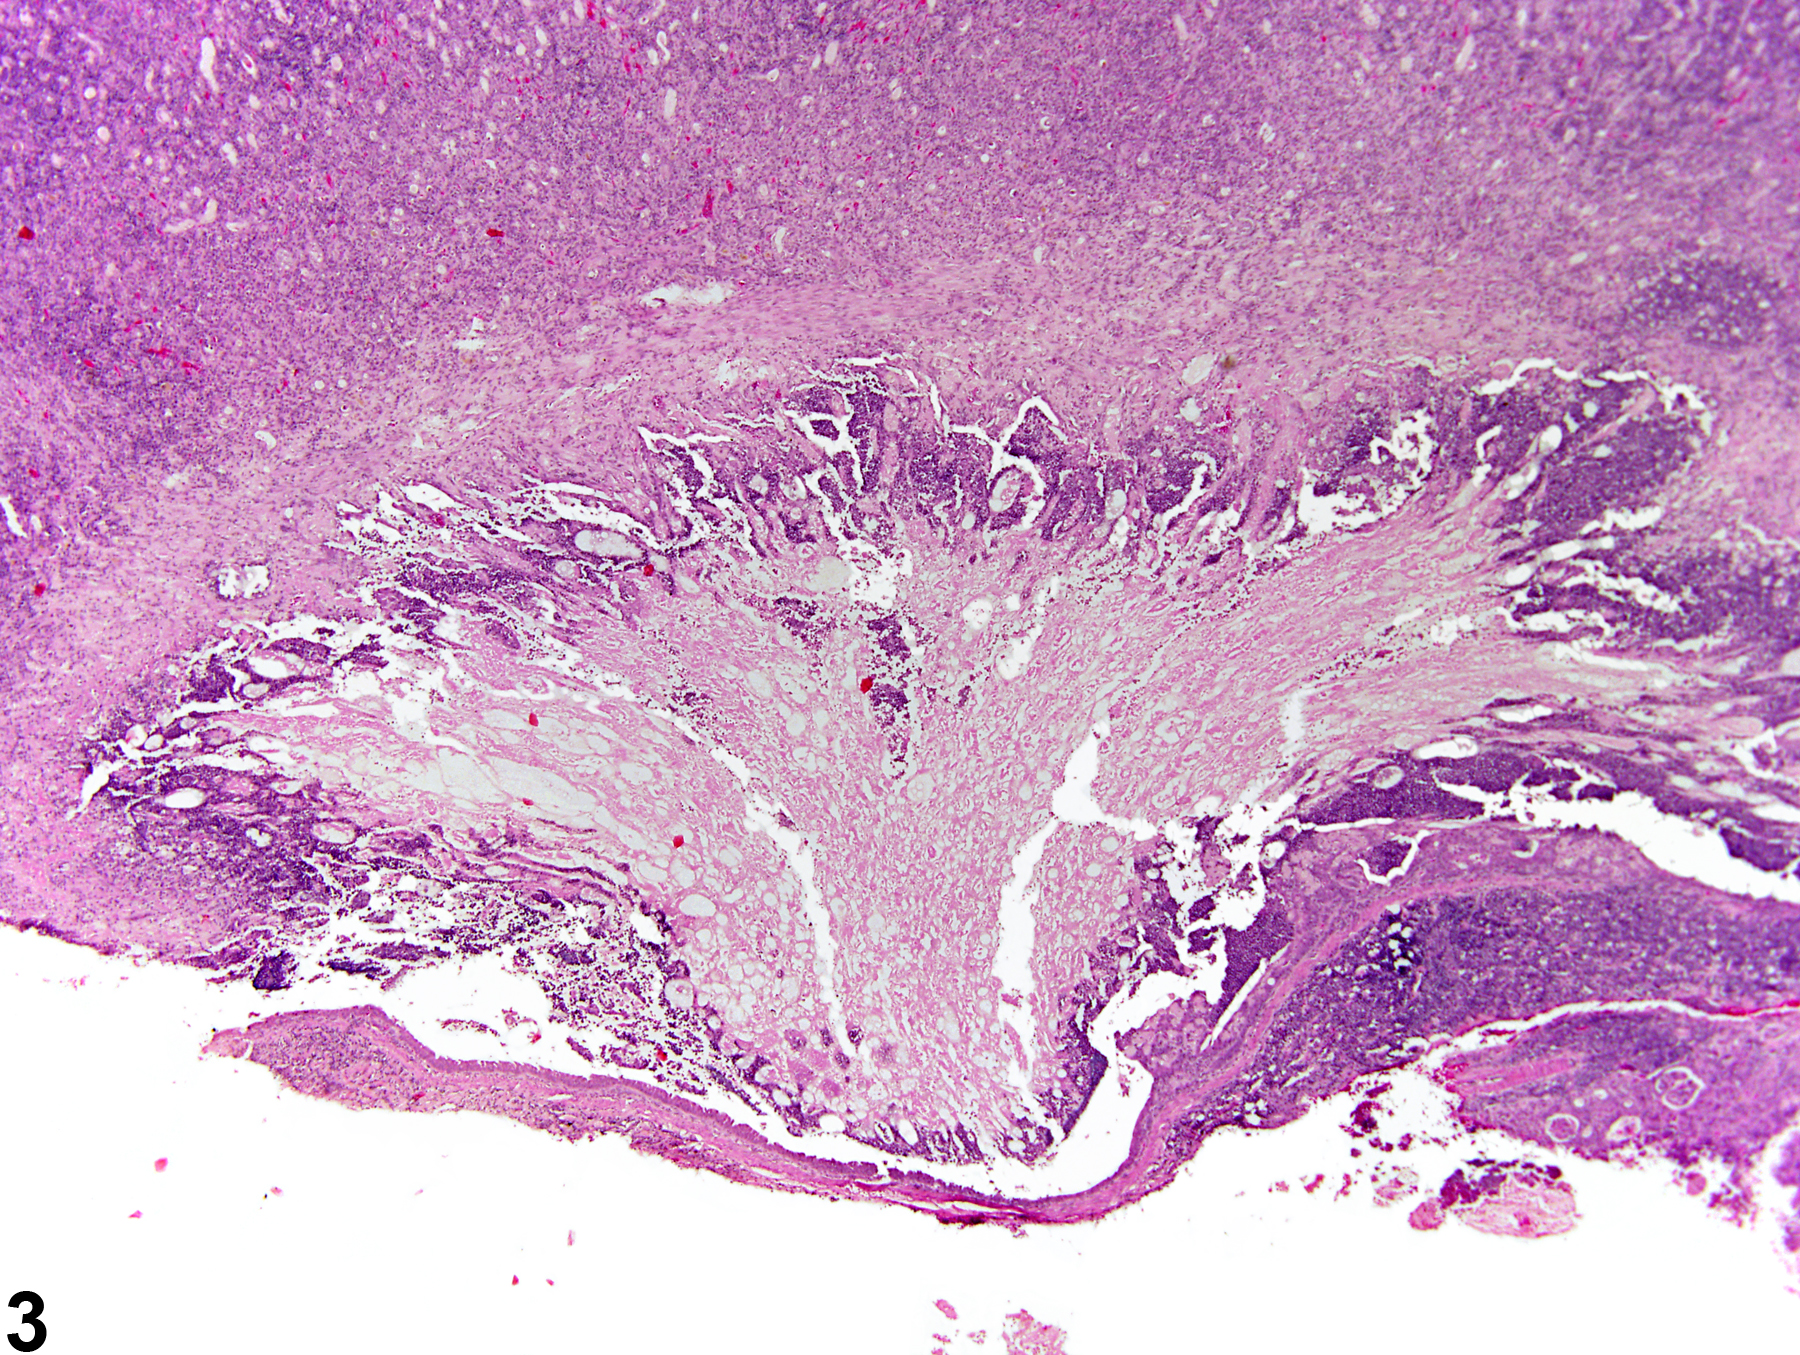 Image of papilla necrosis in the kidney from a female B6C3F1 mouse in a chronic study